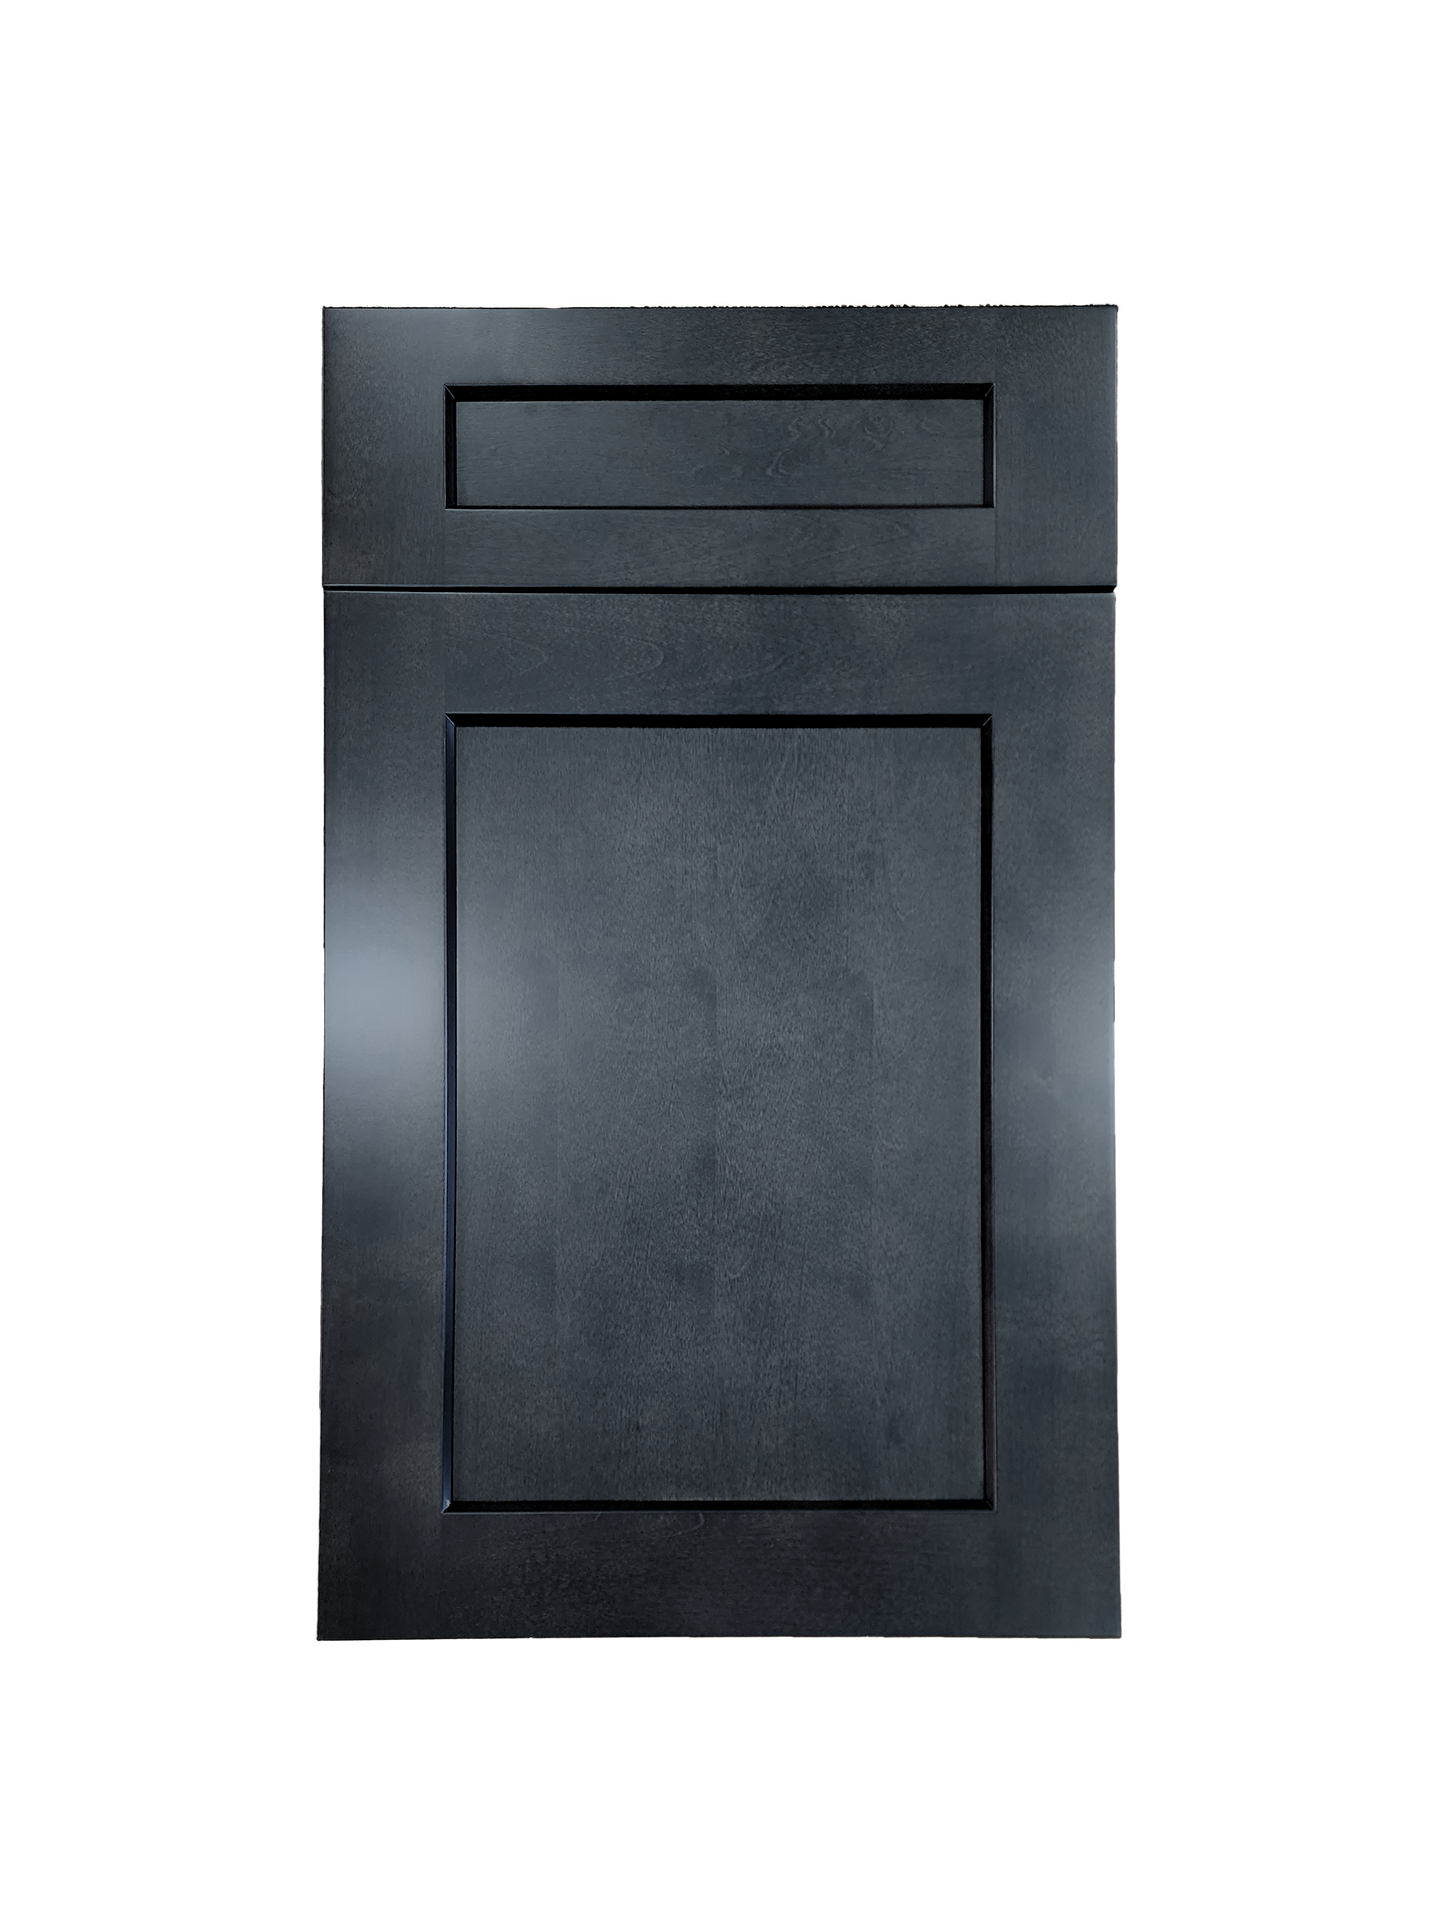 Stormy Grey Wall Microwave Cabinet 24 inches wide 12 inches deep 36 inches tall with Stormy Grey box and Stormy Grey doors